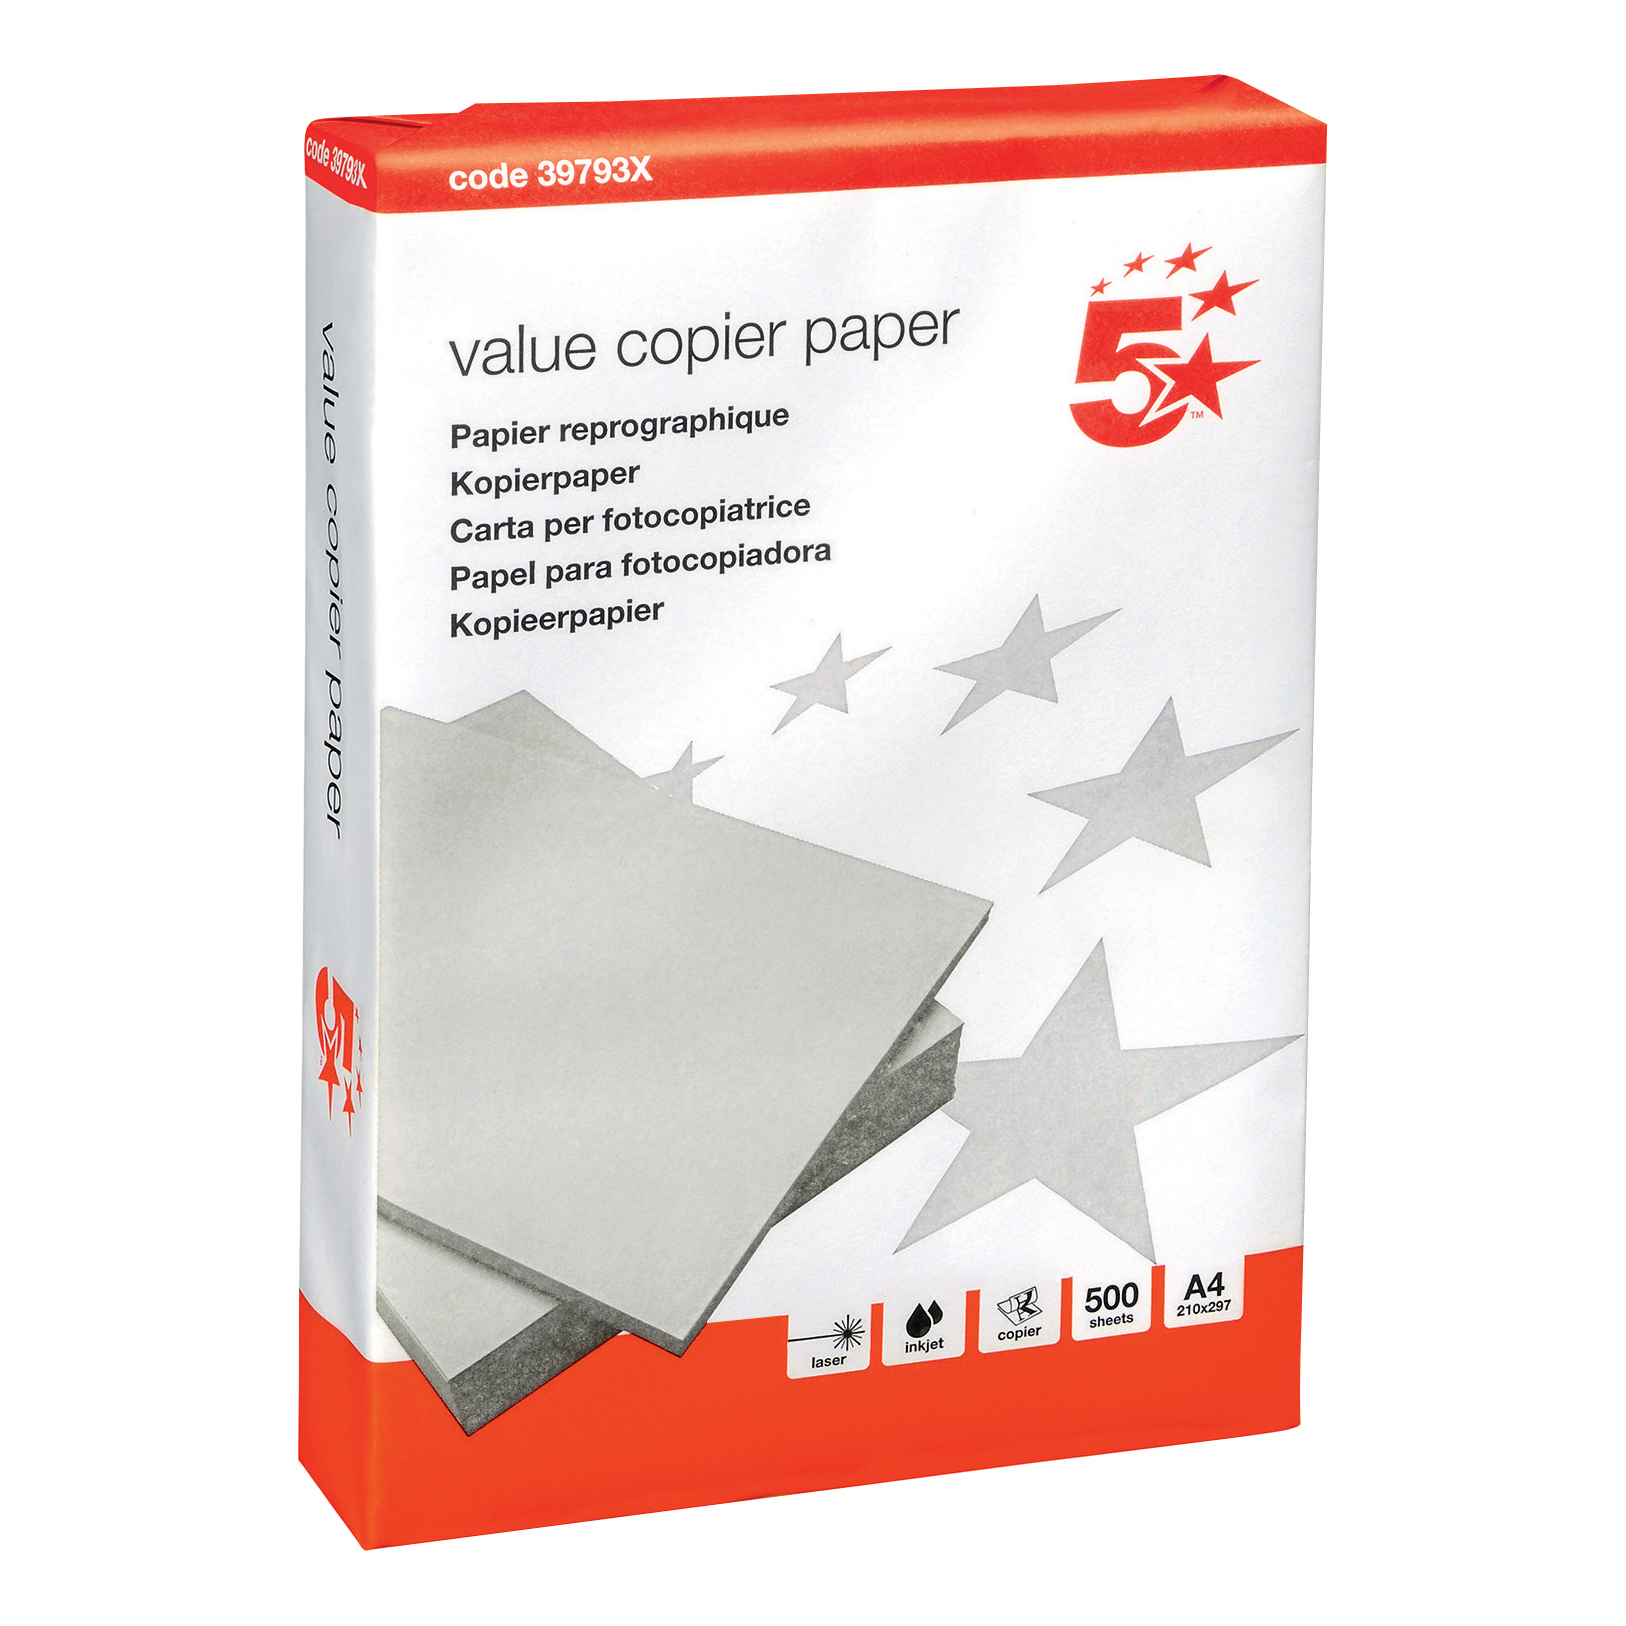 5 Star Office Value Copier Paper Multifunctional 80gsm 500 Sheets per Ream A4 White 1 Ream